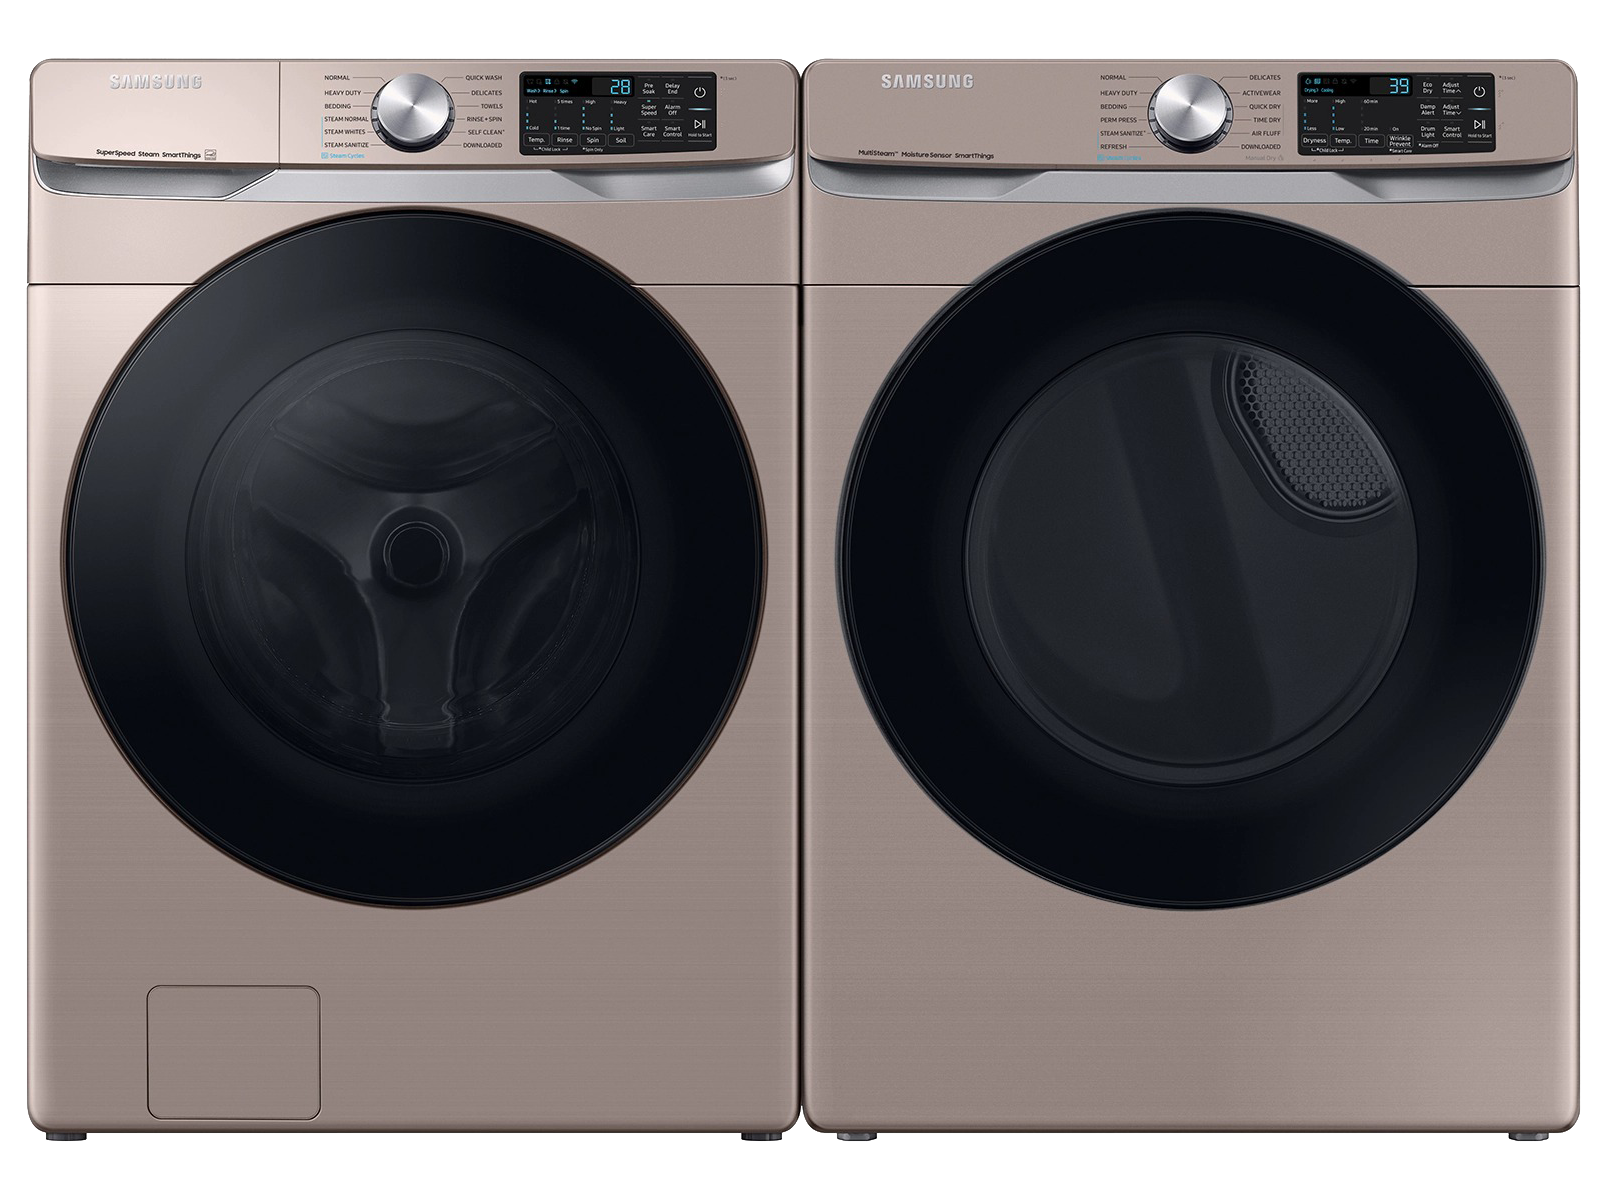 Samsung Large Capacity Smart Front Load Washer with Super Speed Wash & Smart Electric Dryer with Steam Sanitize+ in Champagne(BNDL-1651774284736)